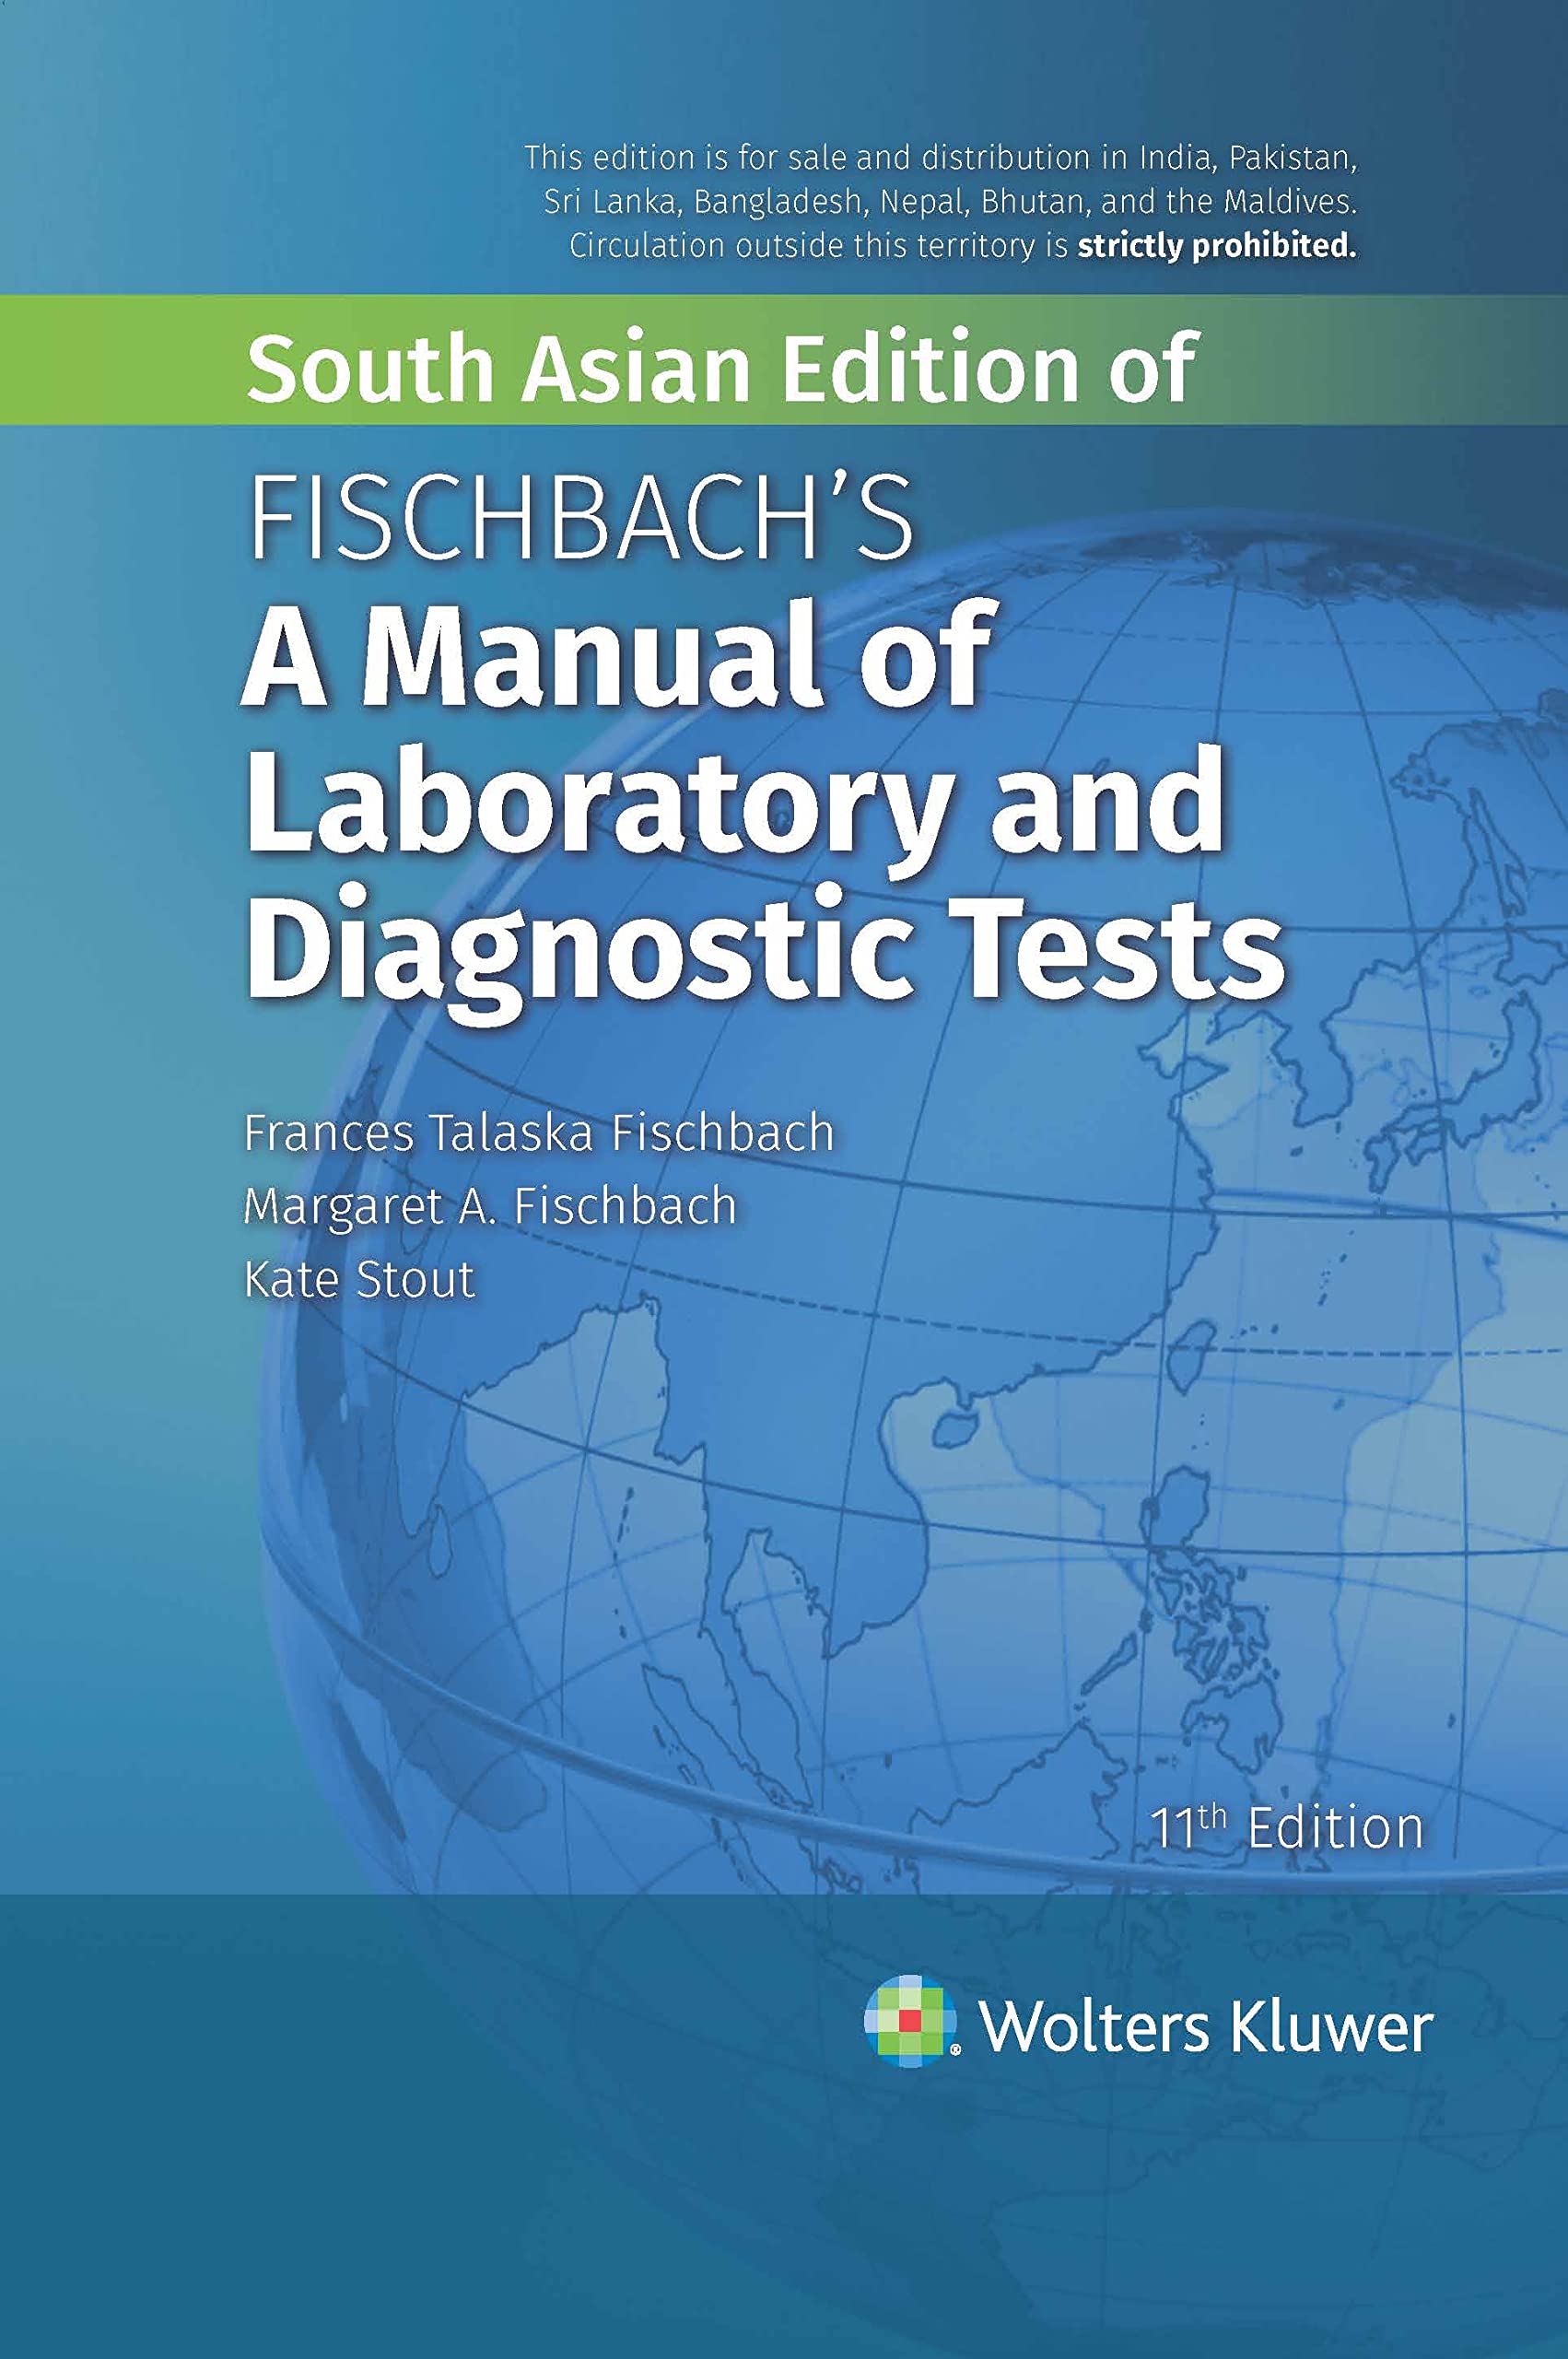 Fischbach'S A Manual Of Laboratory & Diagnostic Tests- AIBH EXCLUSIVE